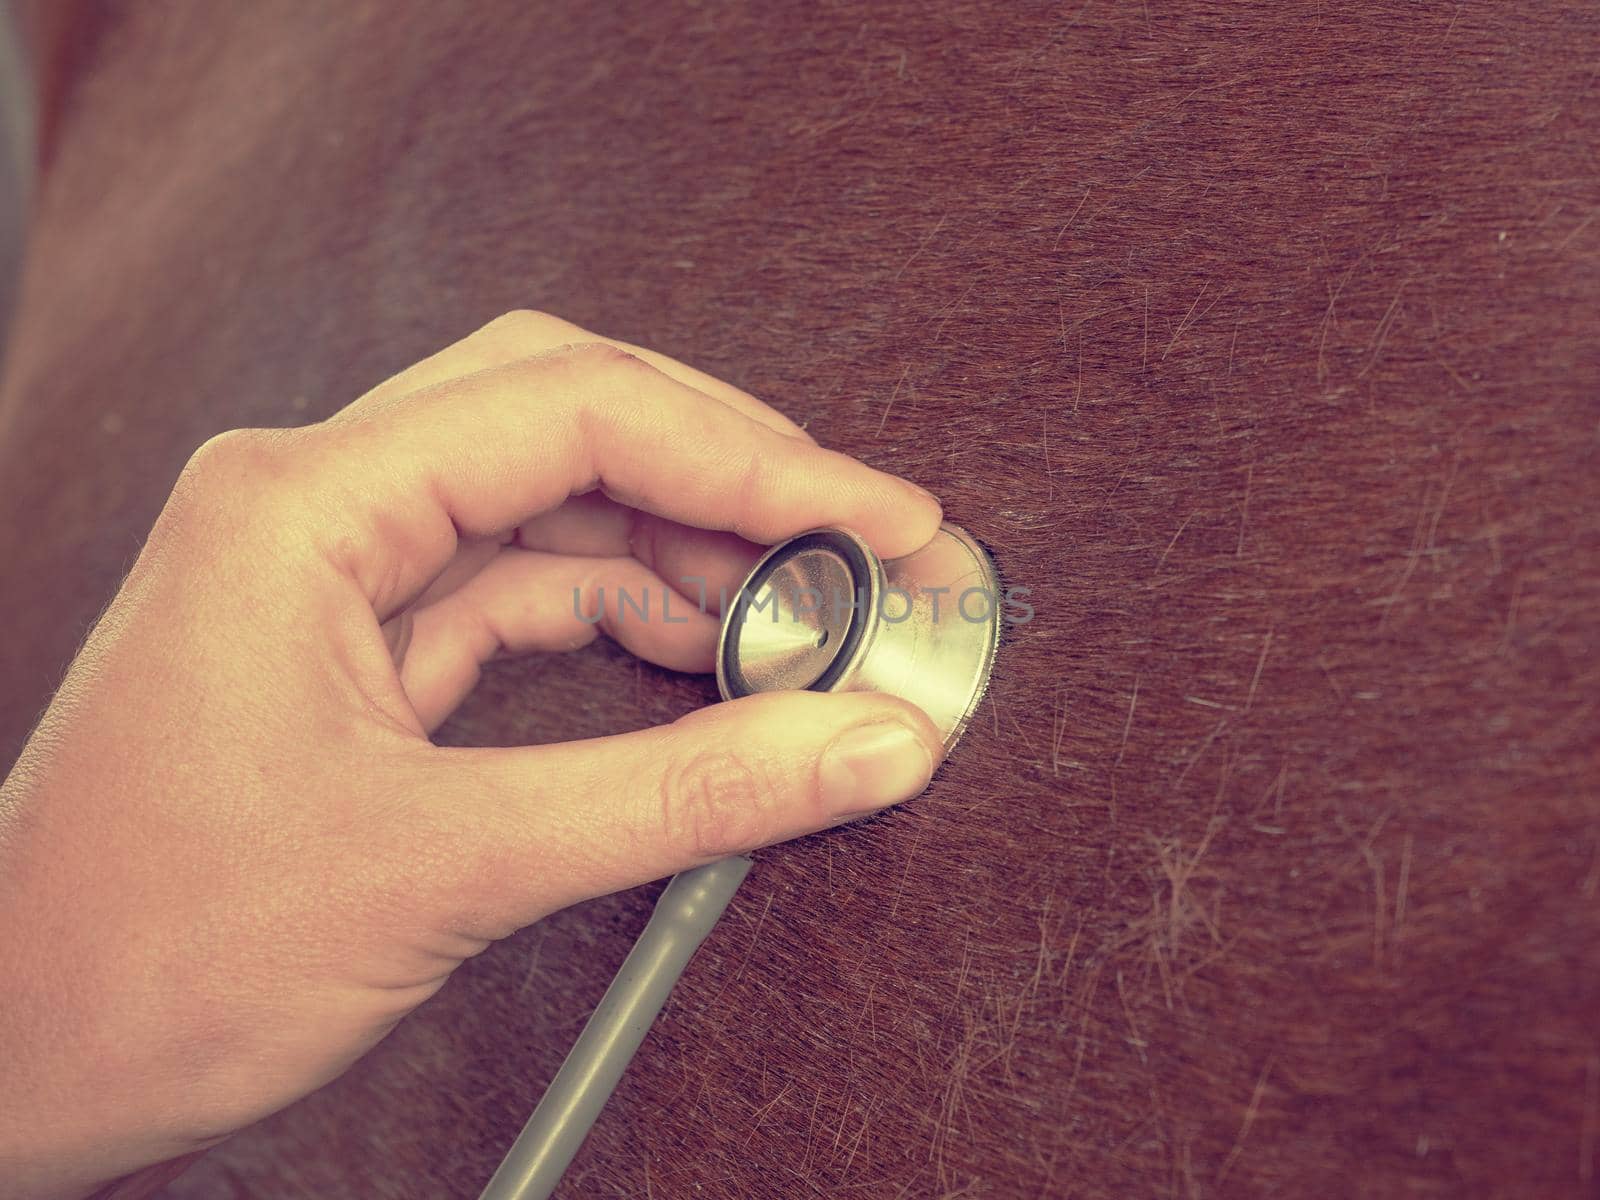 Veterinarian use stethoscope to the lungs of a brown horse. Suspected bronchitis or pneumonia.